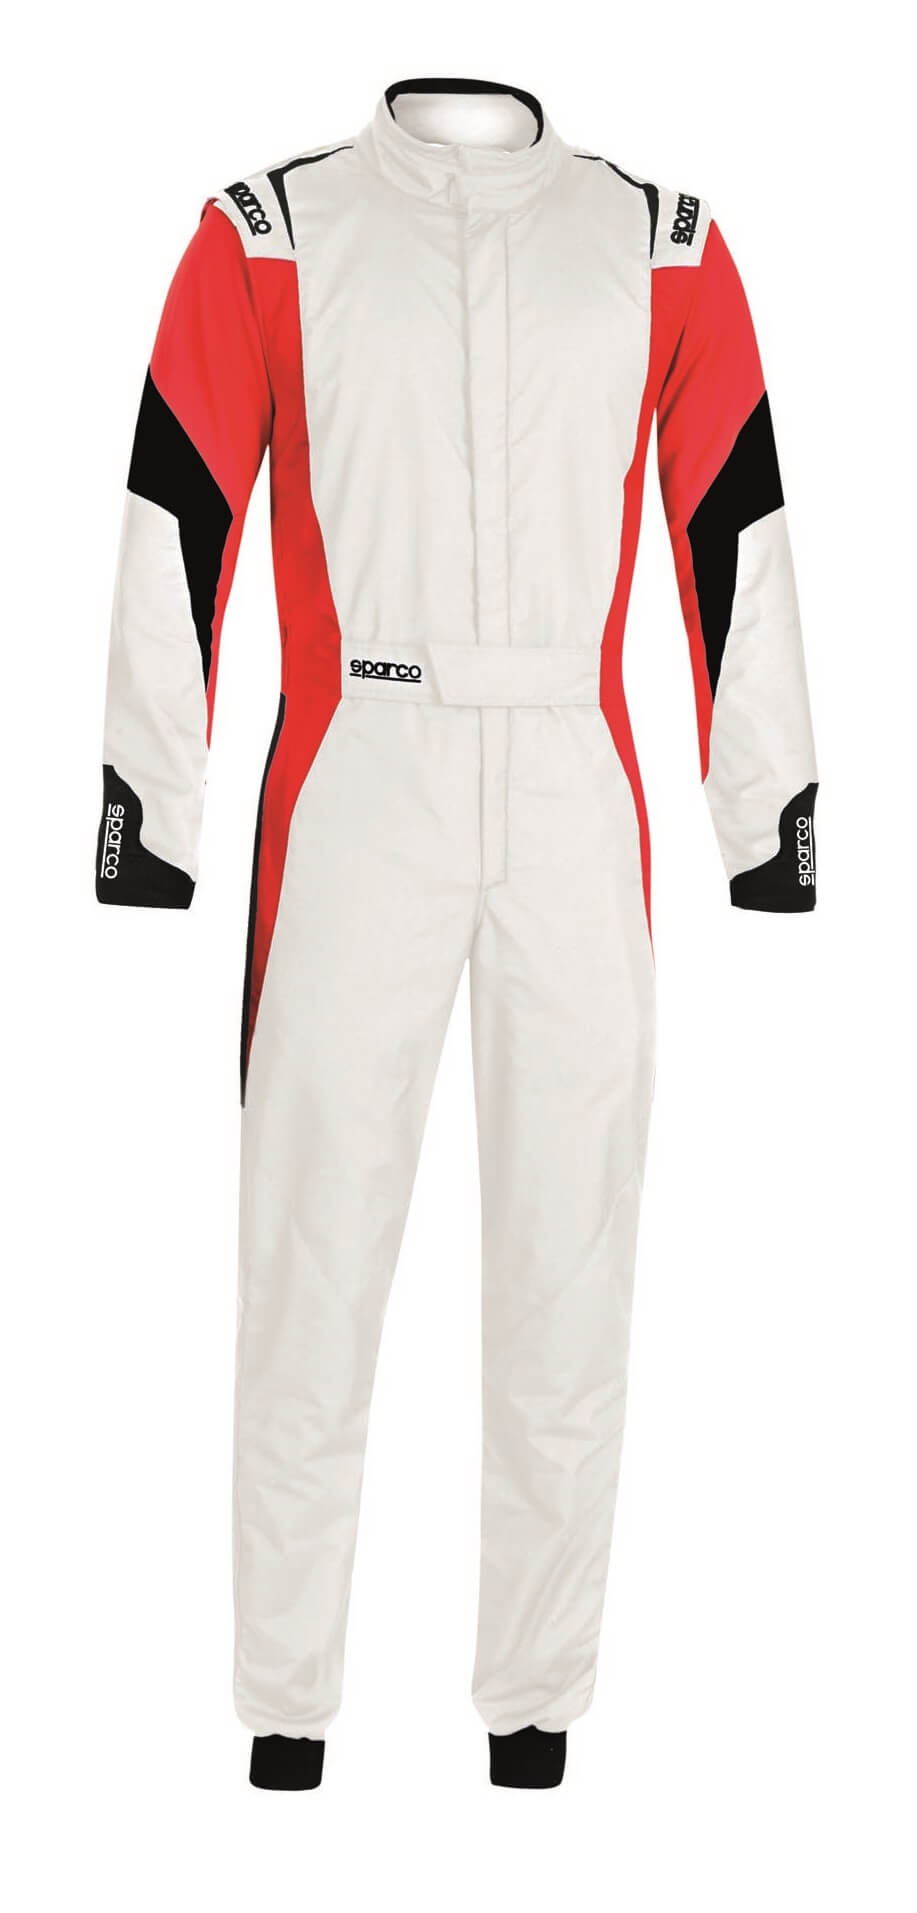 SPARCO 00114450BRNR COMPETITION Racing suit 2022, FIA 8856-2018, white/red, size 50 Photo-0 